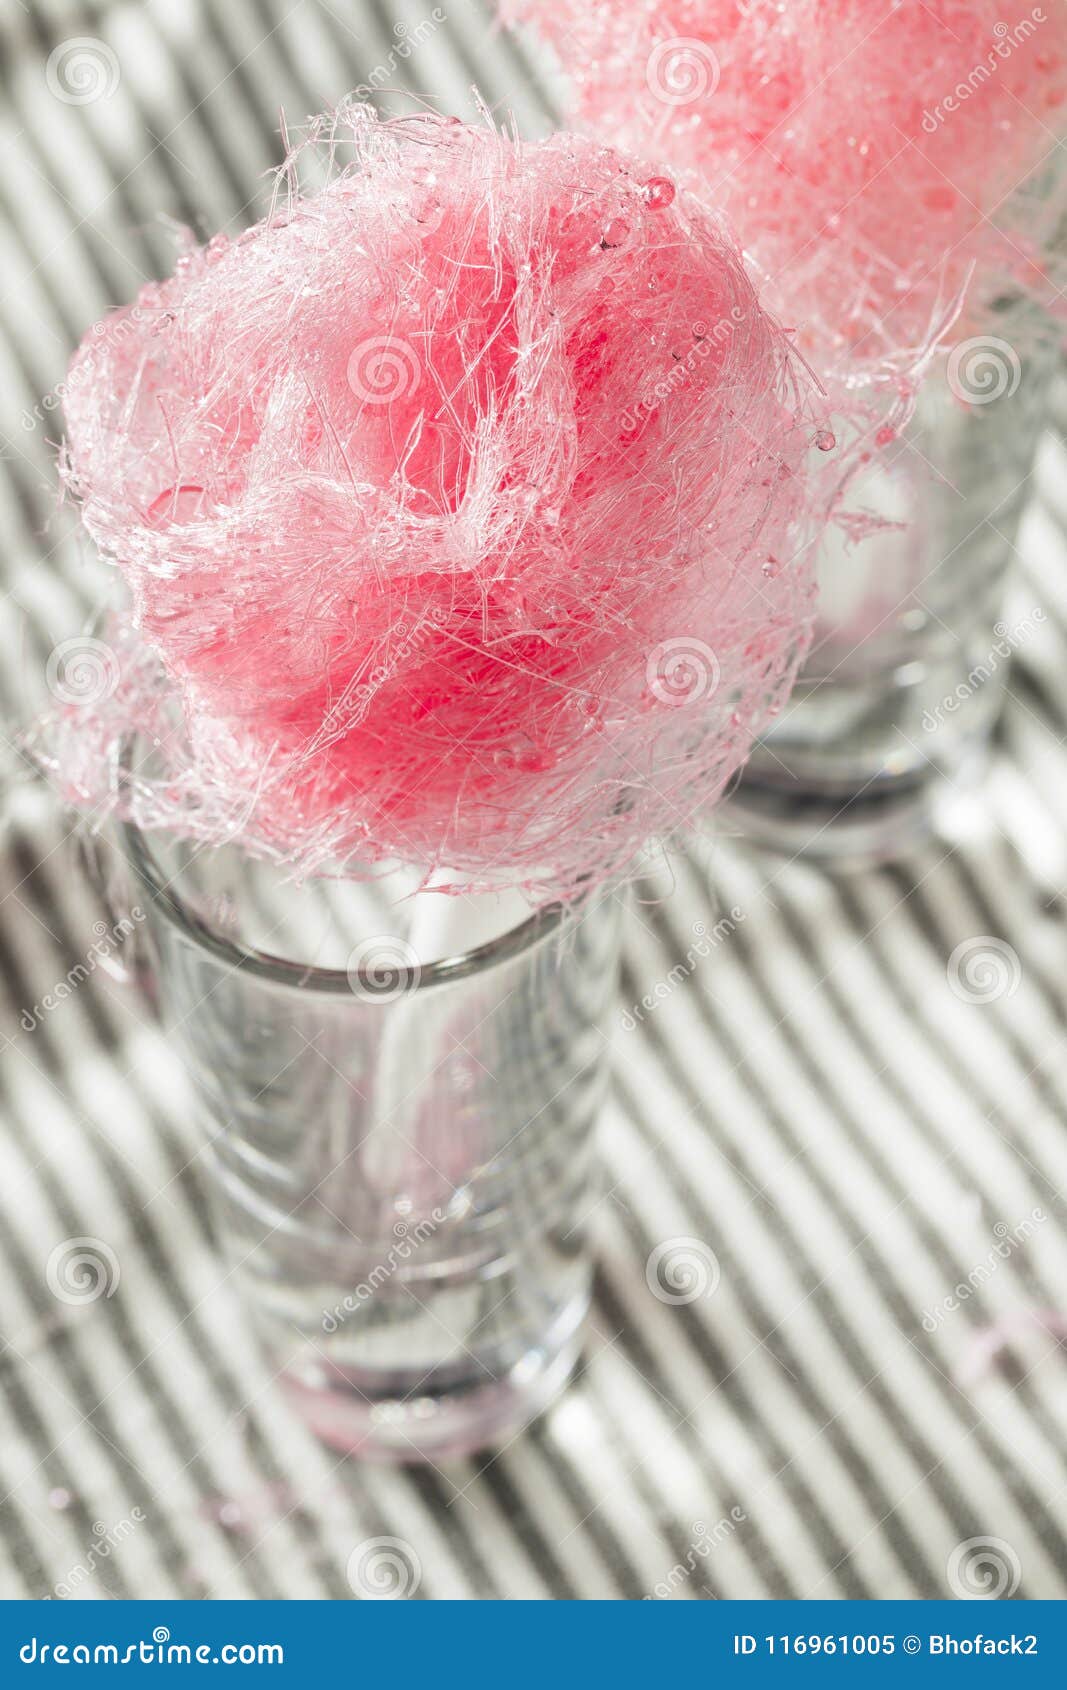 Sugary Pink Homemade Cotton Candy Floss Stock Image Image Of Cottoncandy Cotton